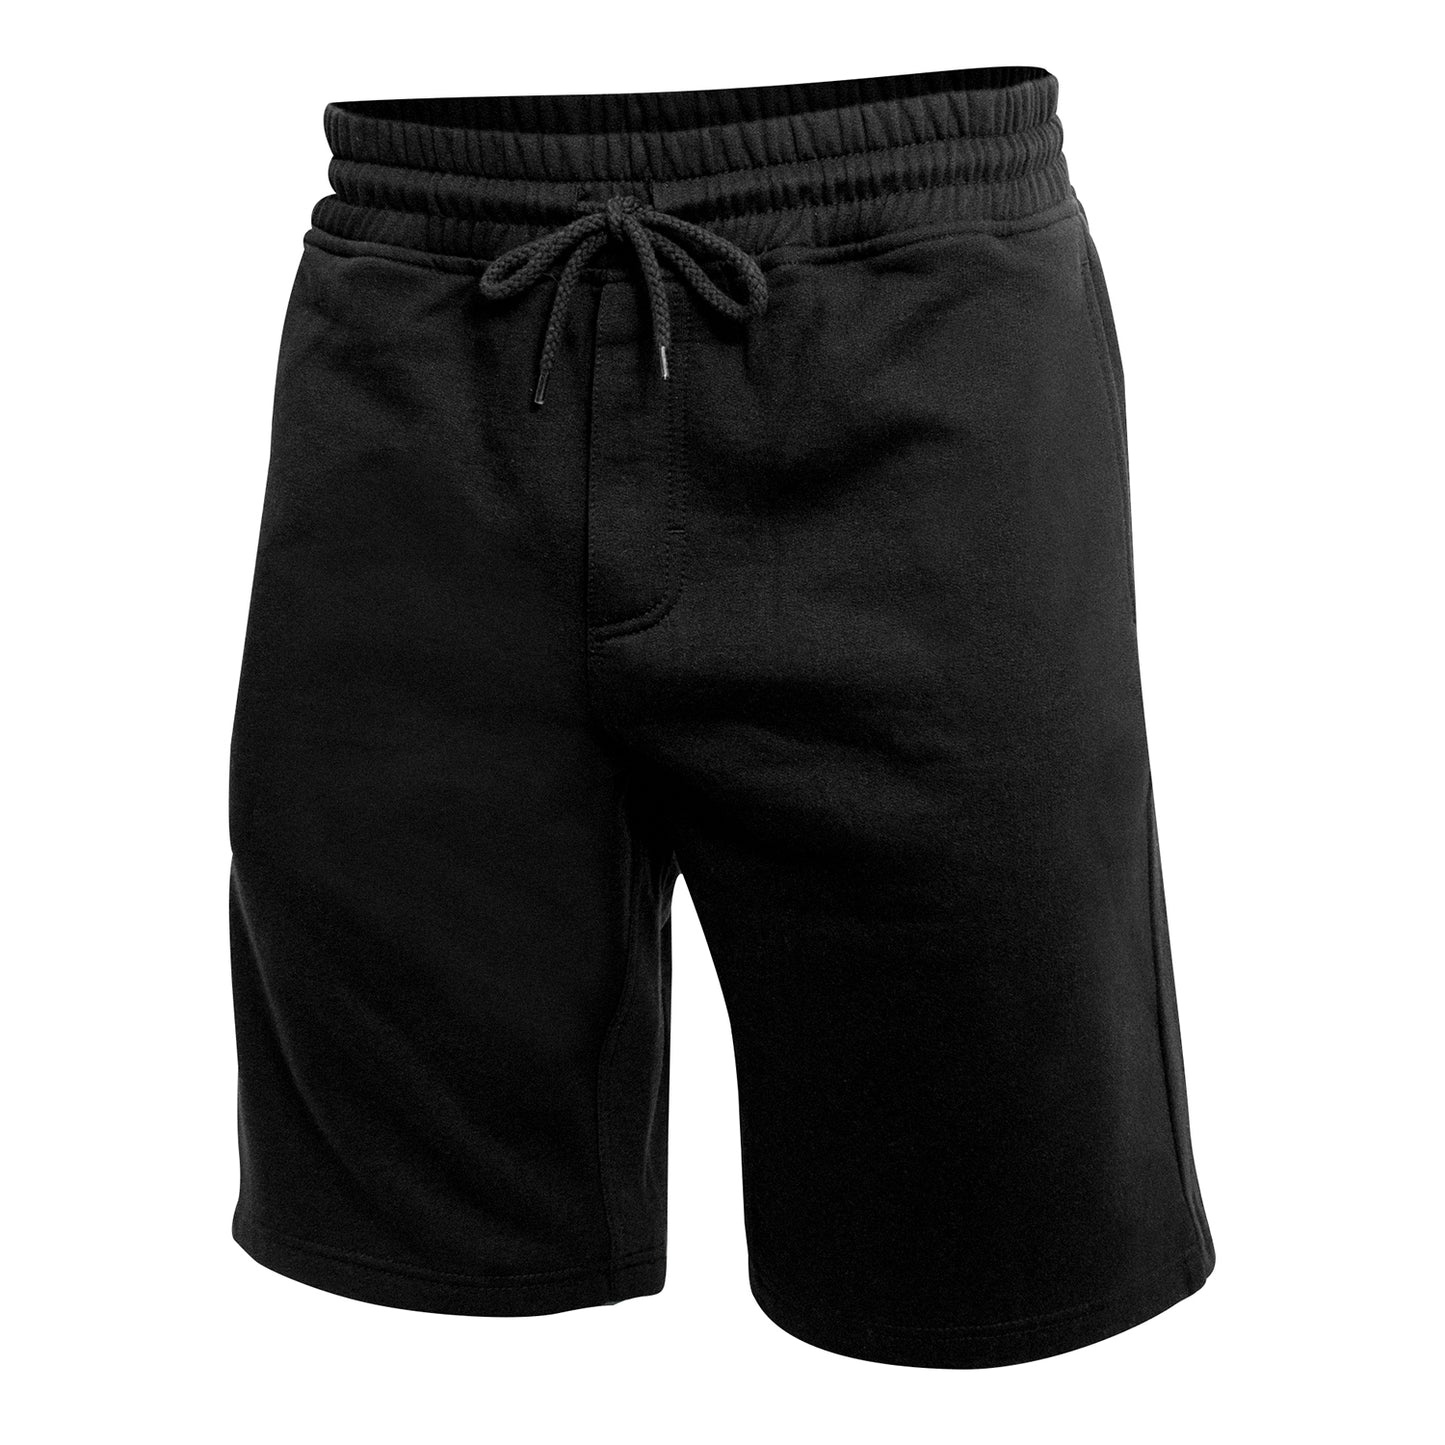 Men's Black Sweat Shorts Poly Cotton Lounging Shorts – Grunt Force